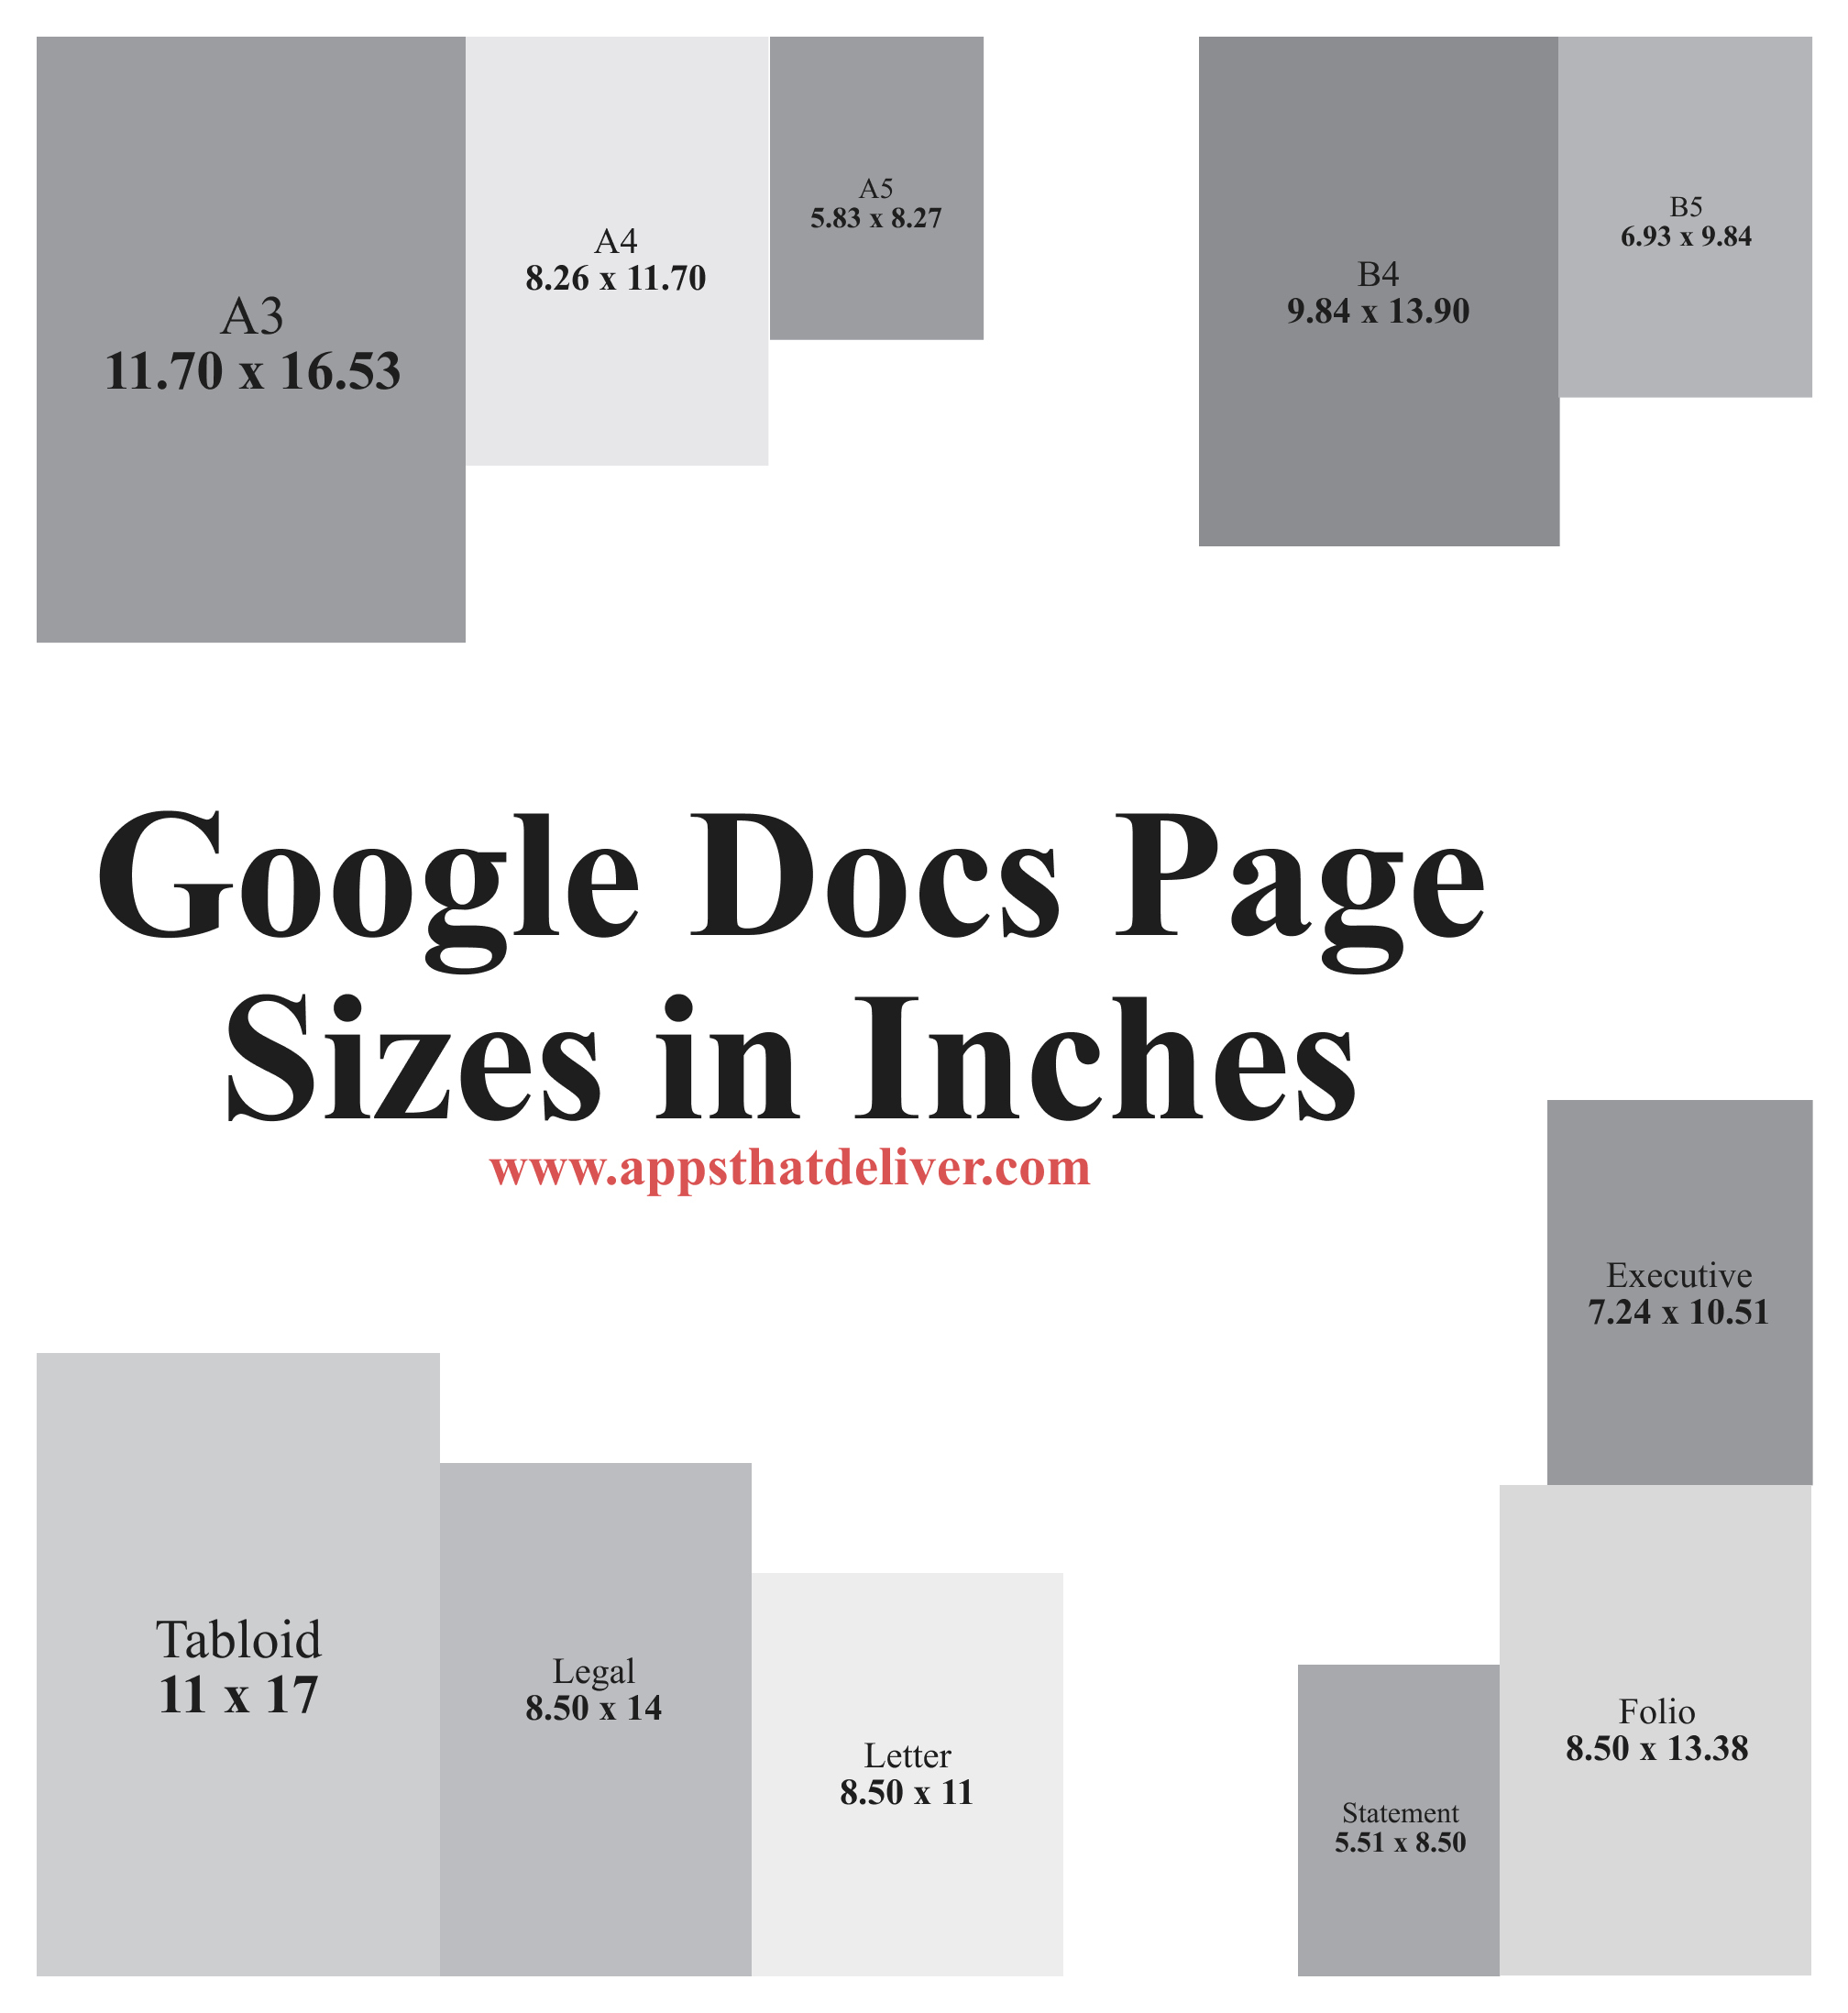 Google Docs Page sizes in inches